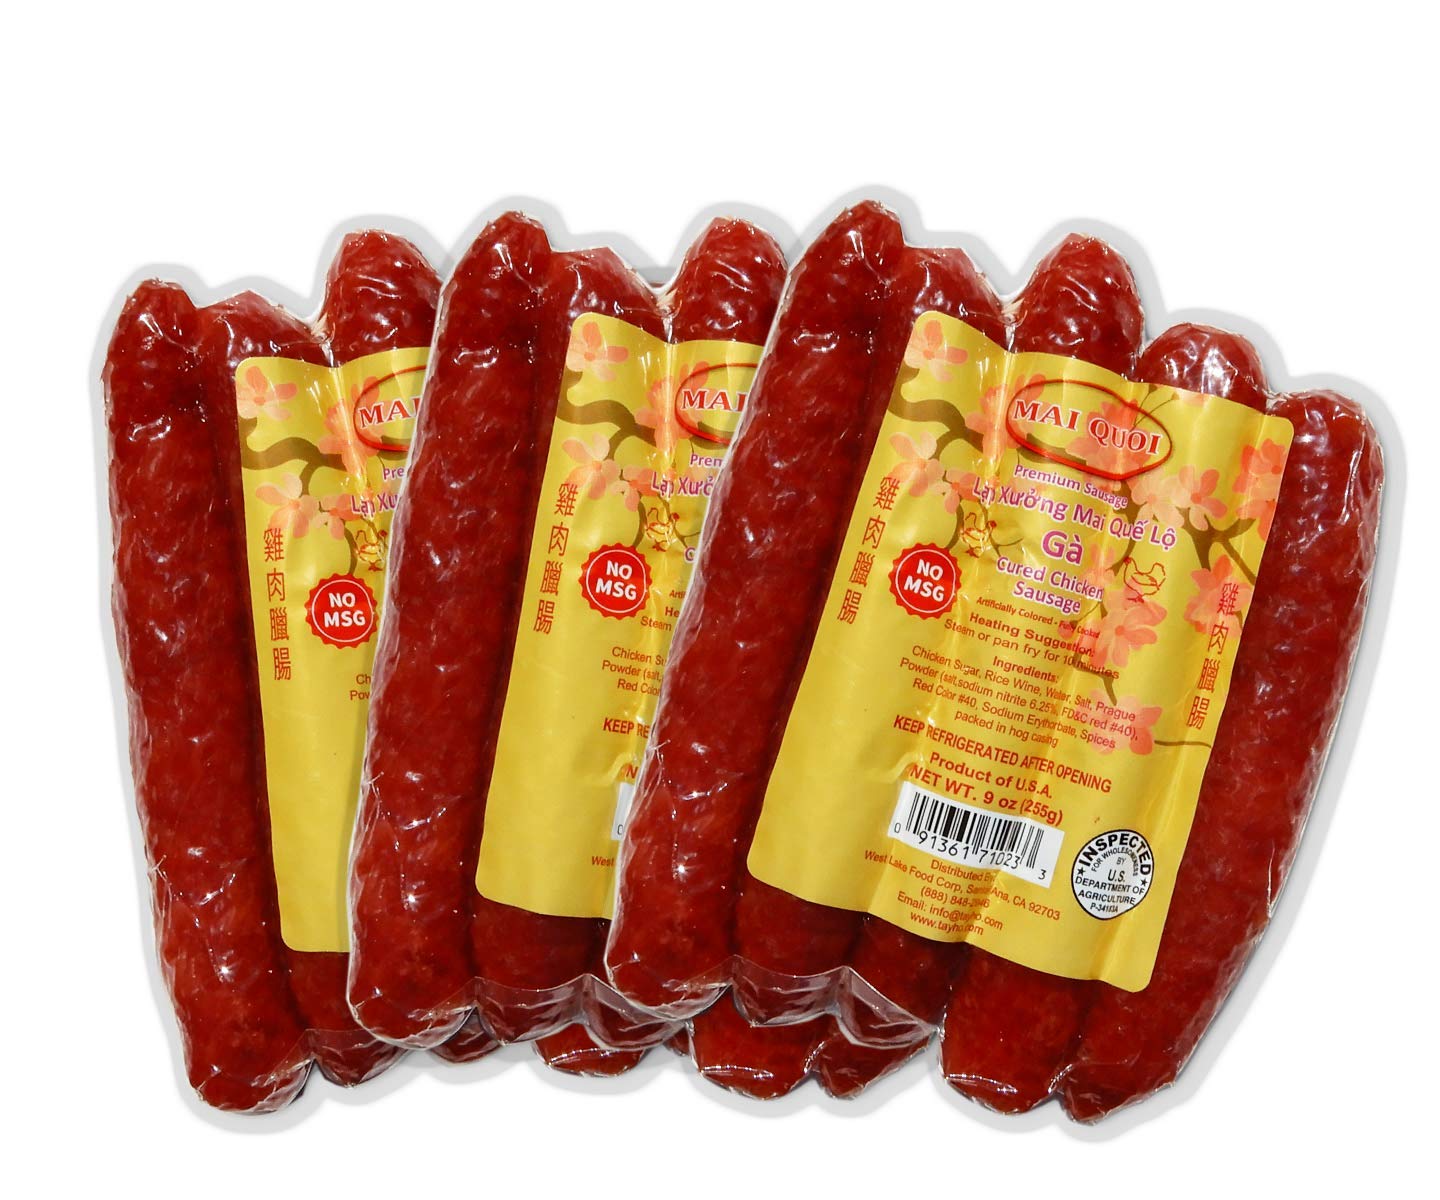 LAP XUONG GA – Gourmet CHICKEN CURED SAUSAGE 3 packs (No MSG) – Made In USA